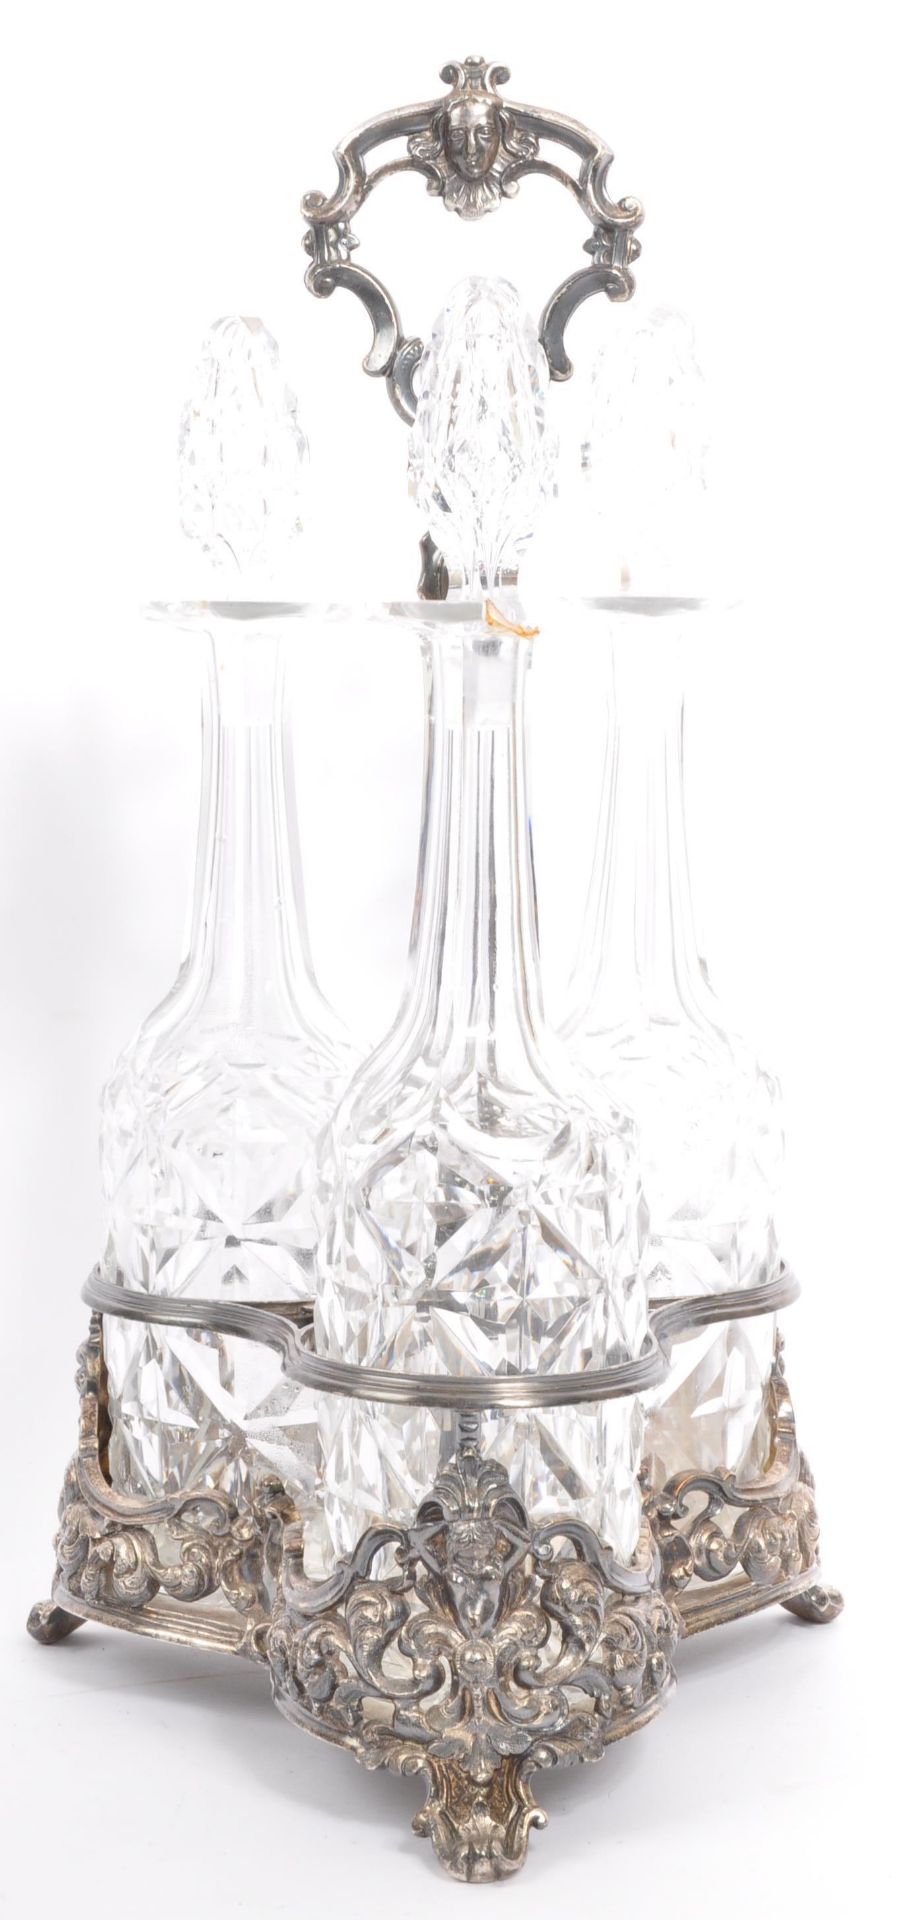 19TH CENTURY SILVER PLATED CUT GLASS DECANTER TANTALUS